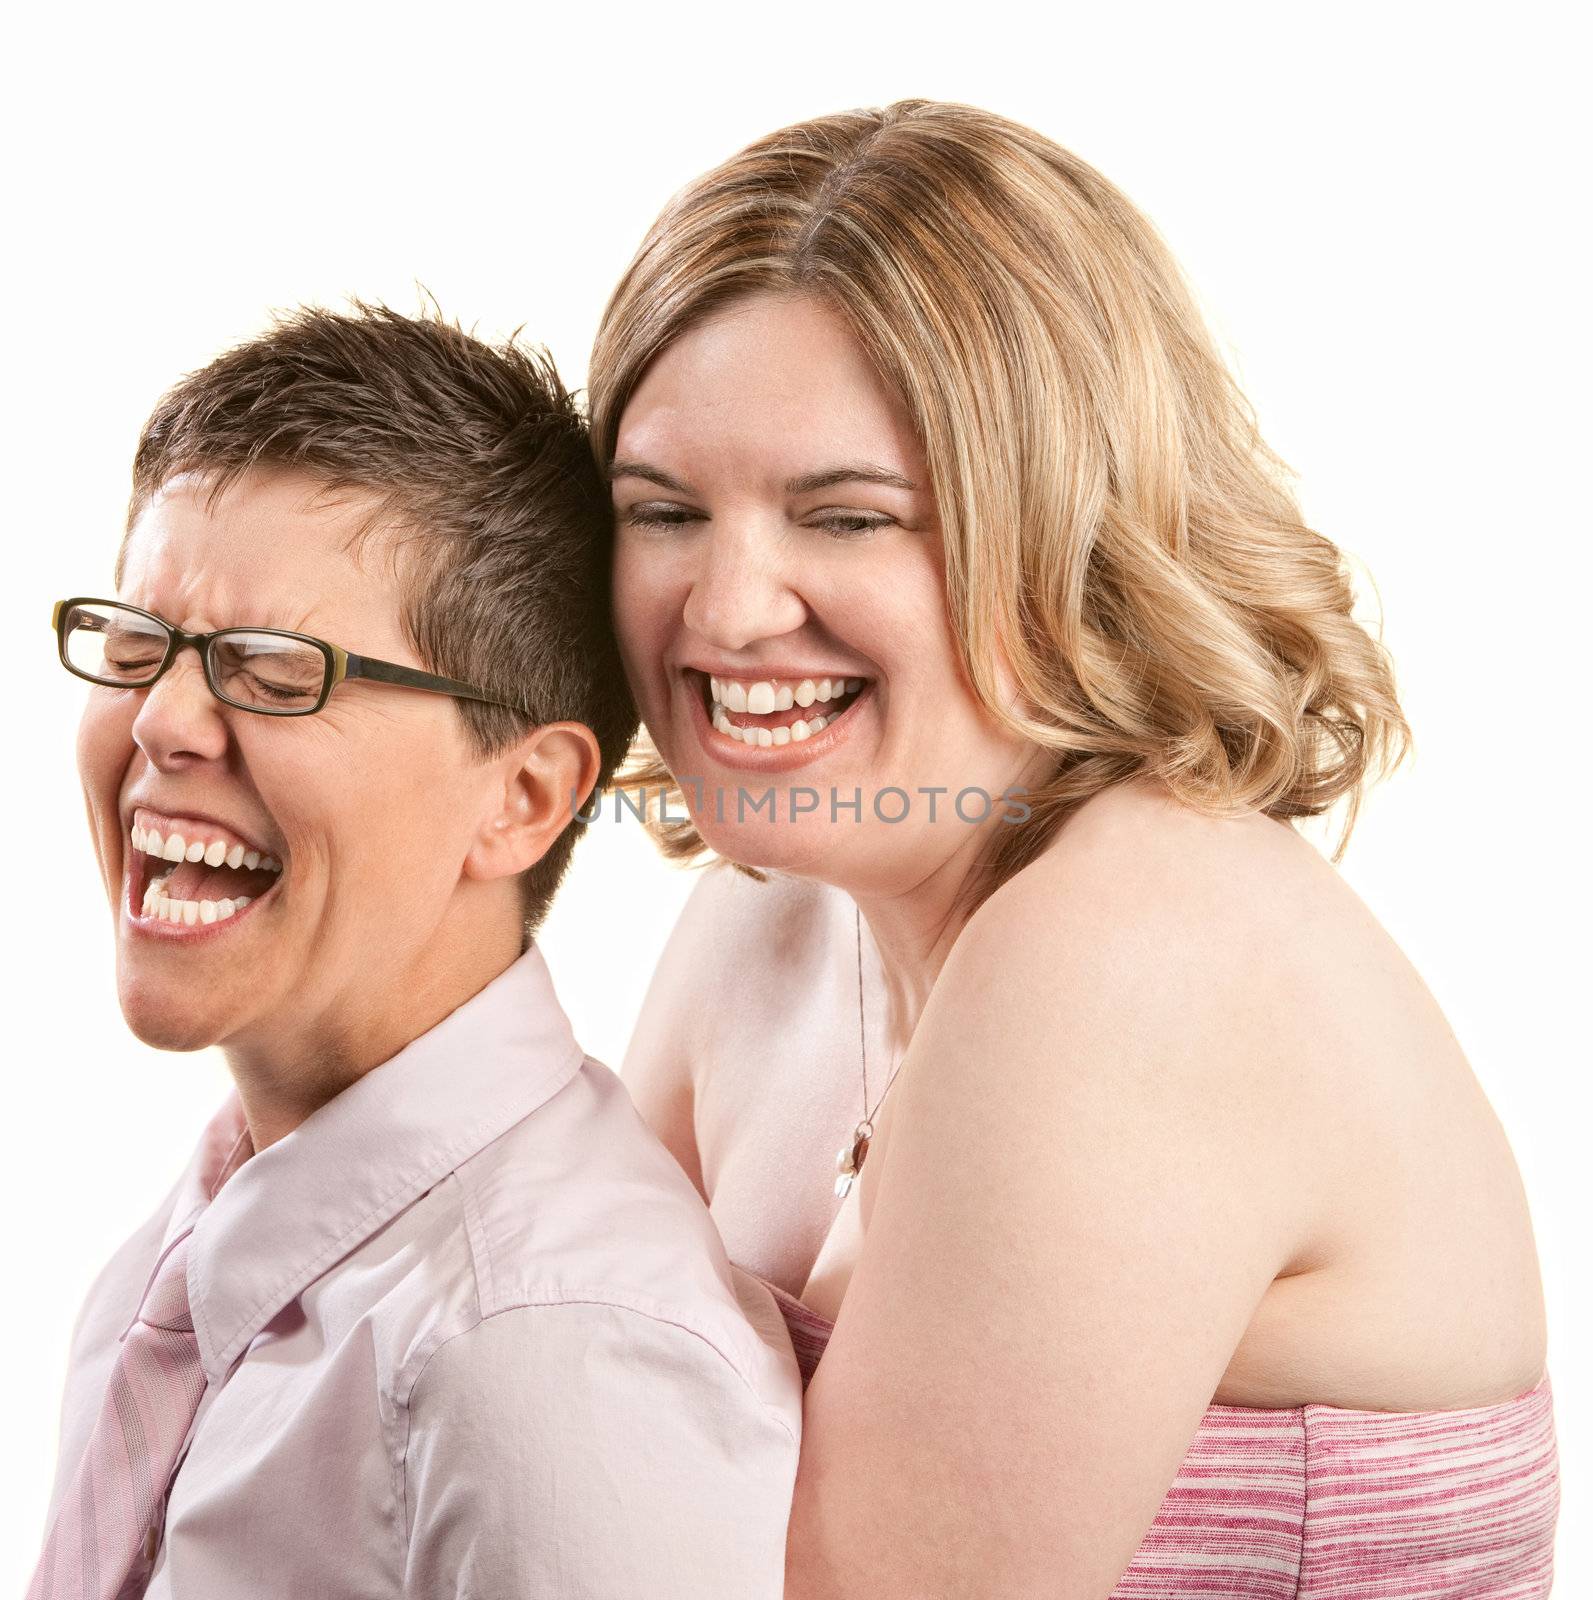 Two European friends laughing together over white background